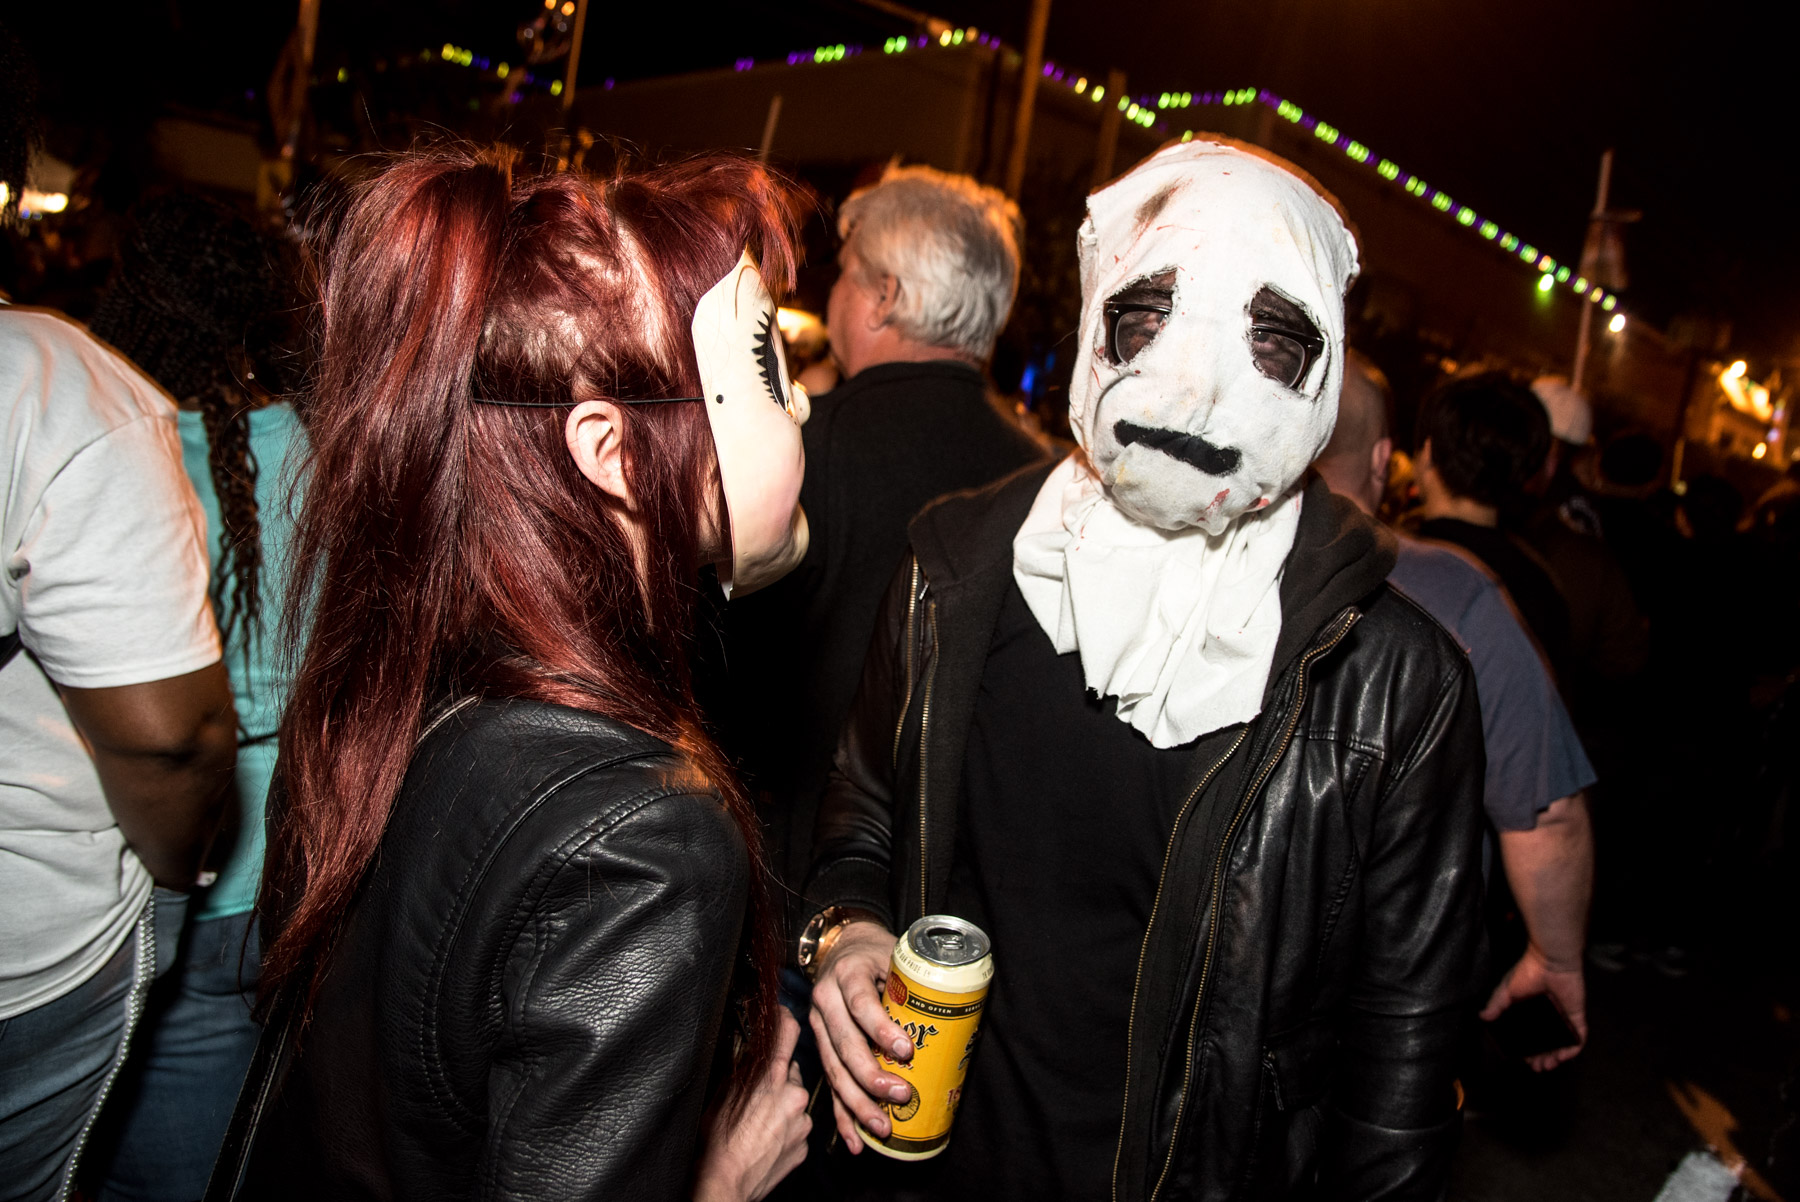 The Best Places to Party This Halloween in Dallas